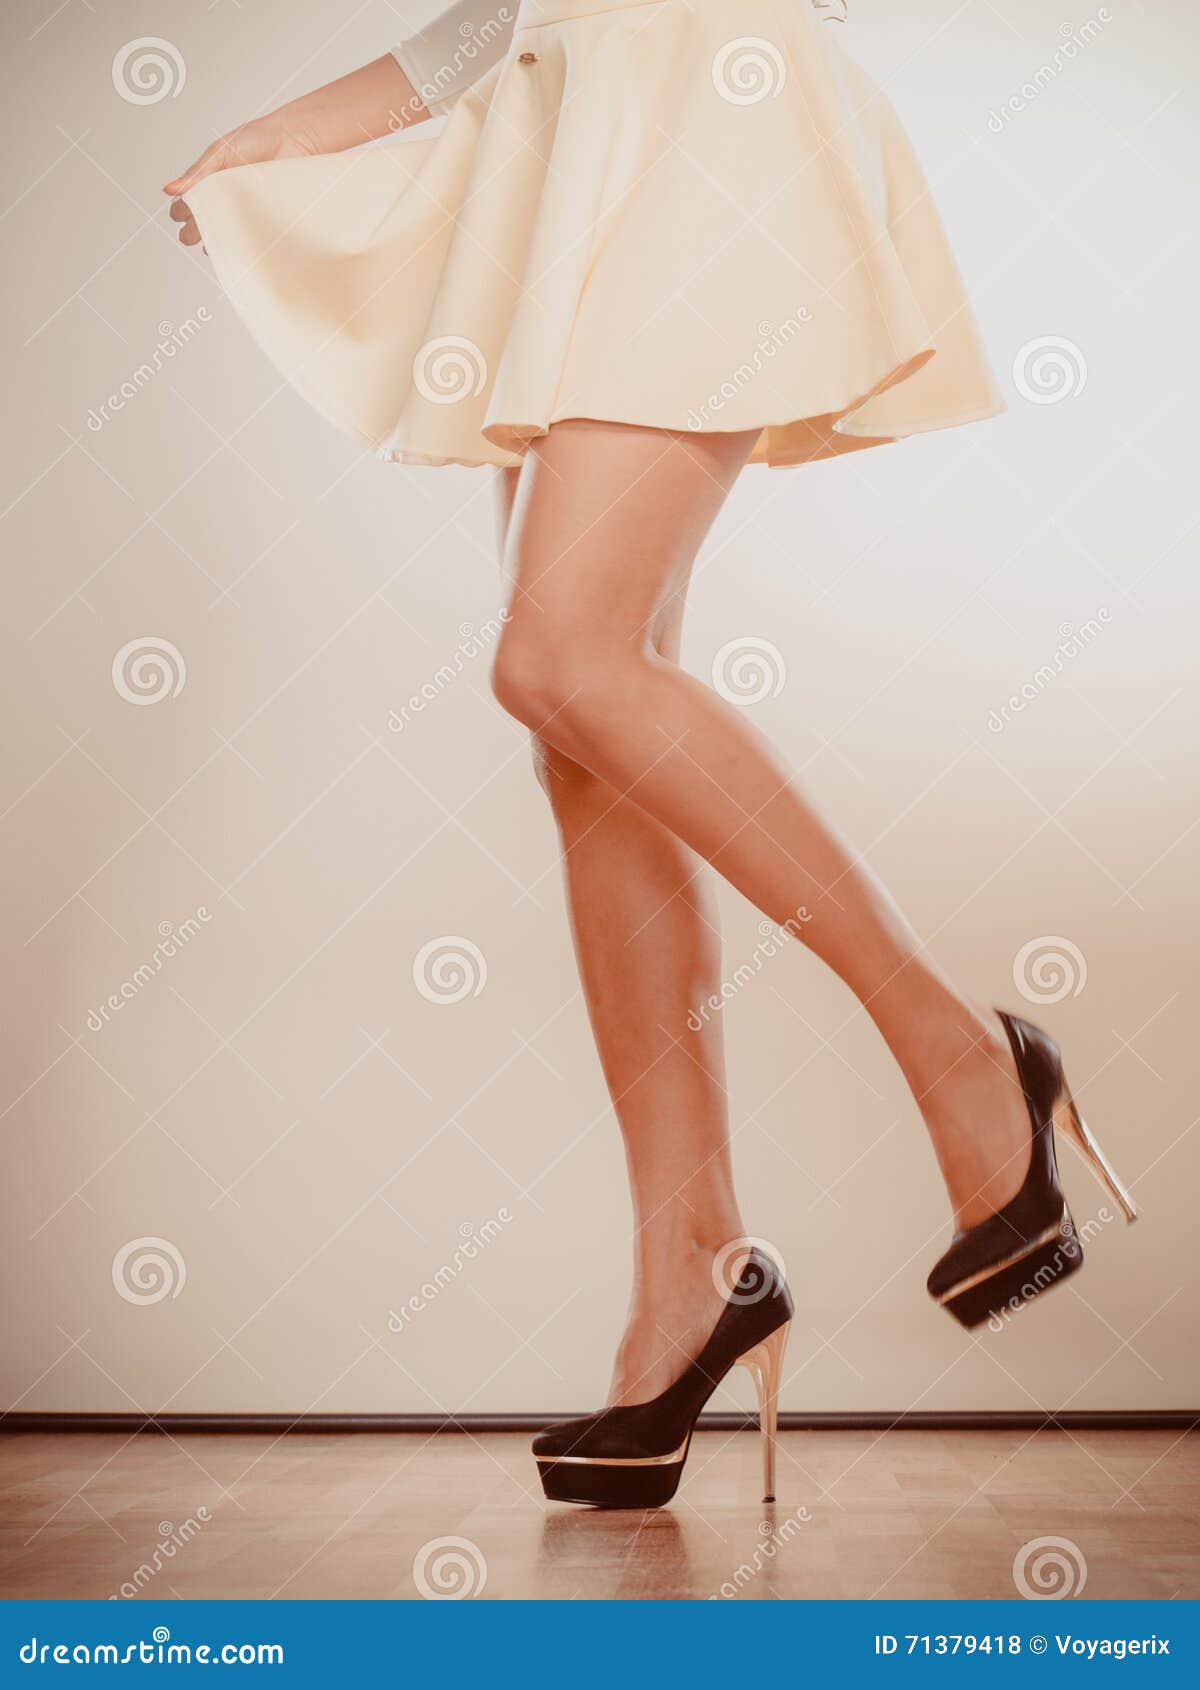 High Heels Spiked Shoes on Female Legs Stock Photo - Image of footwear ...